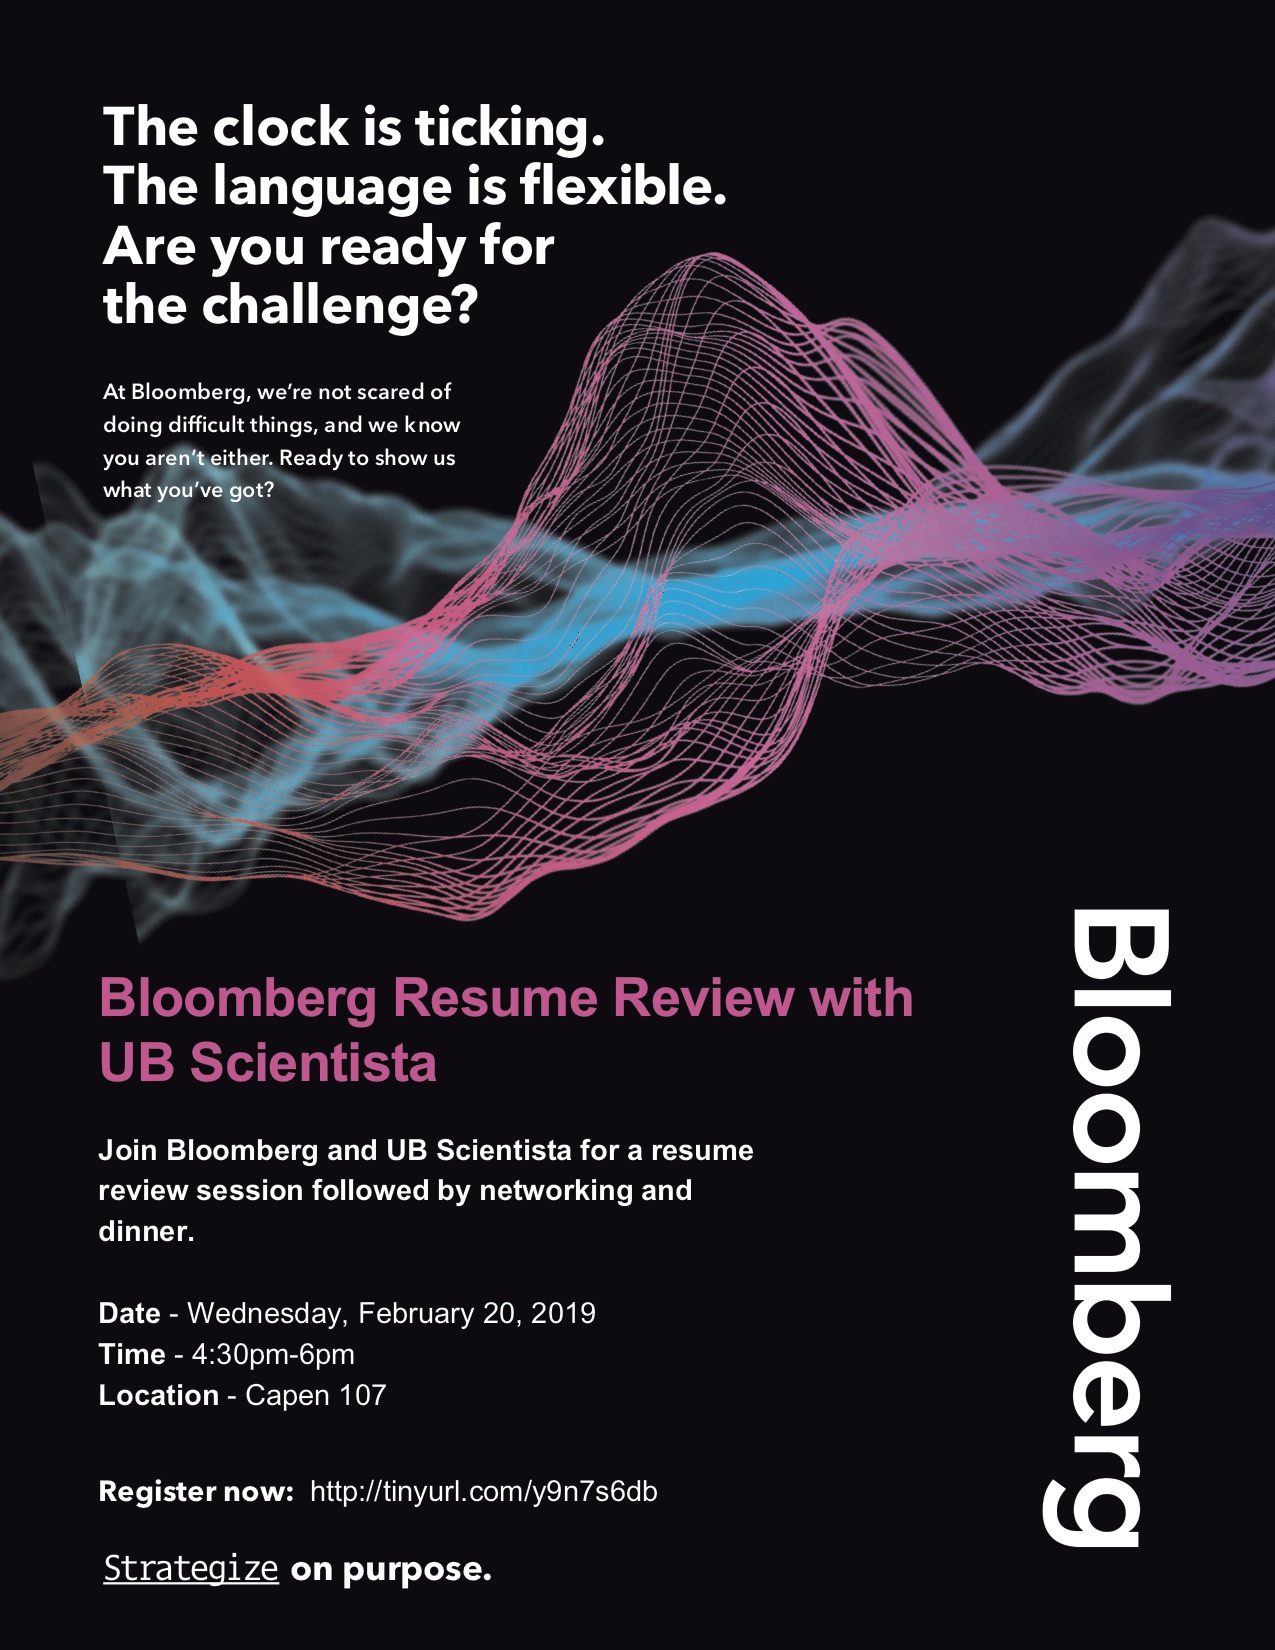 Bloomberg resume review